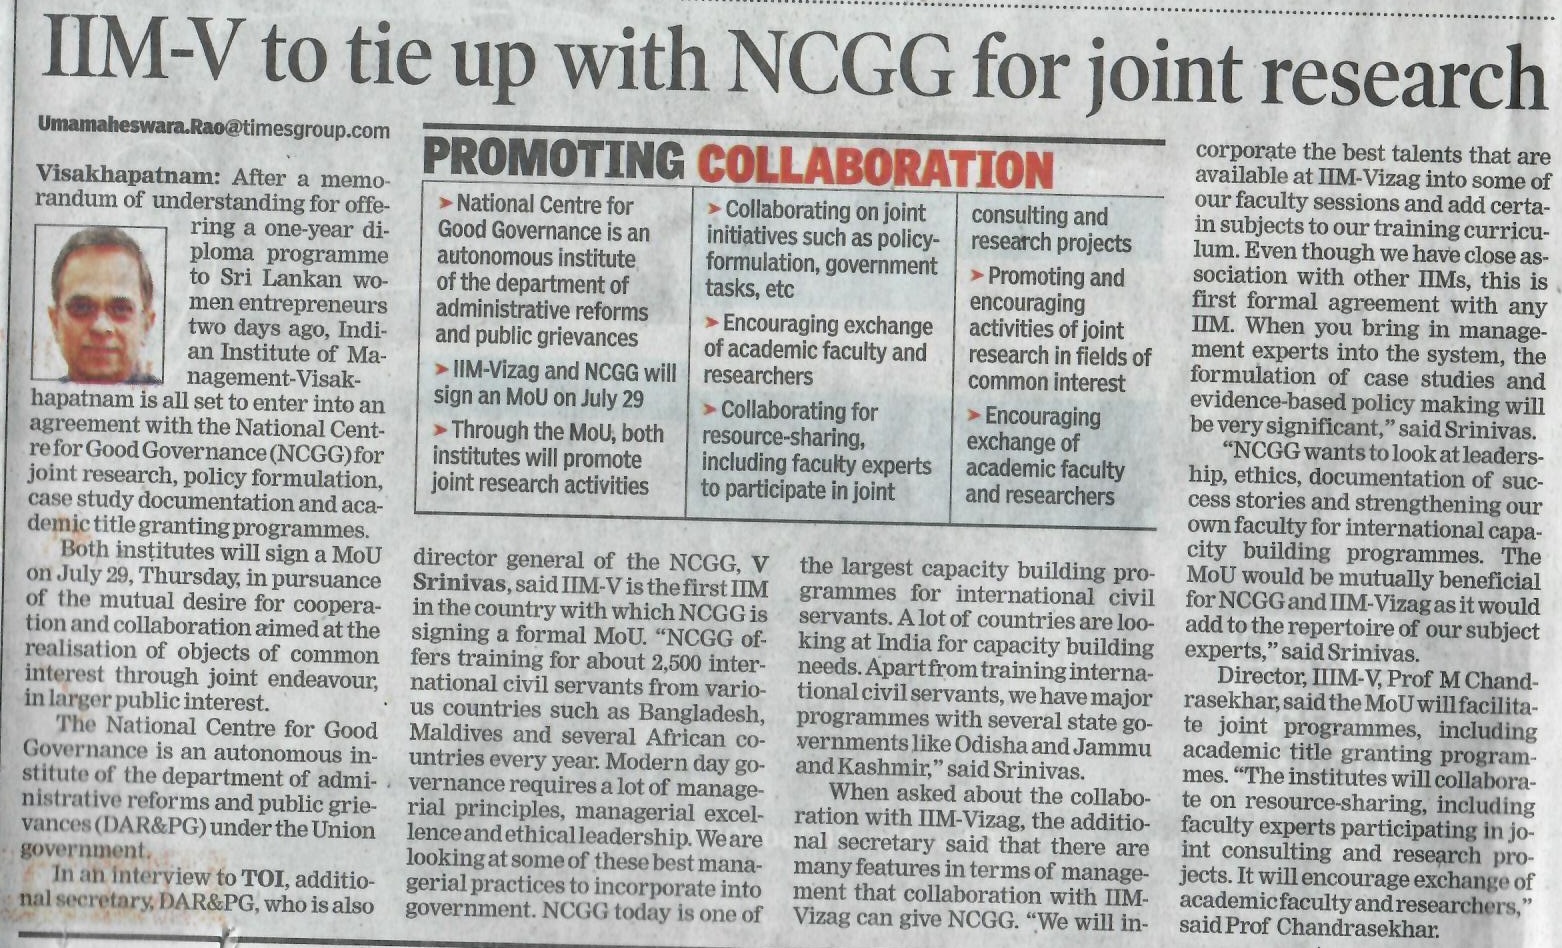 IIMV to tie up with NCGG for joint research - 29.07.2021